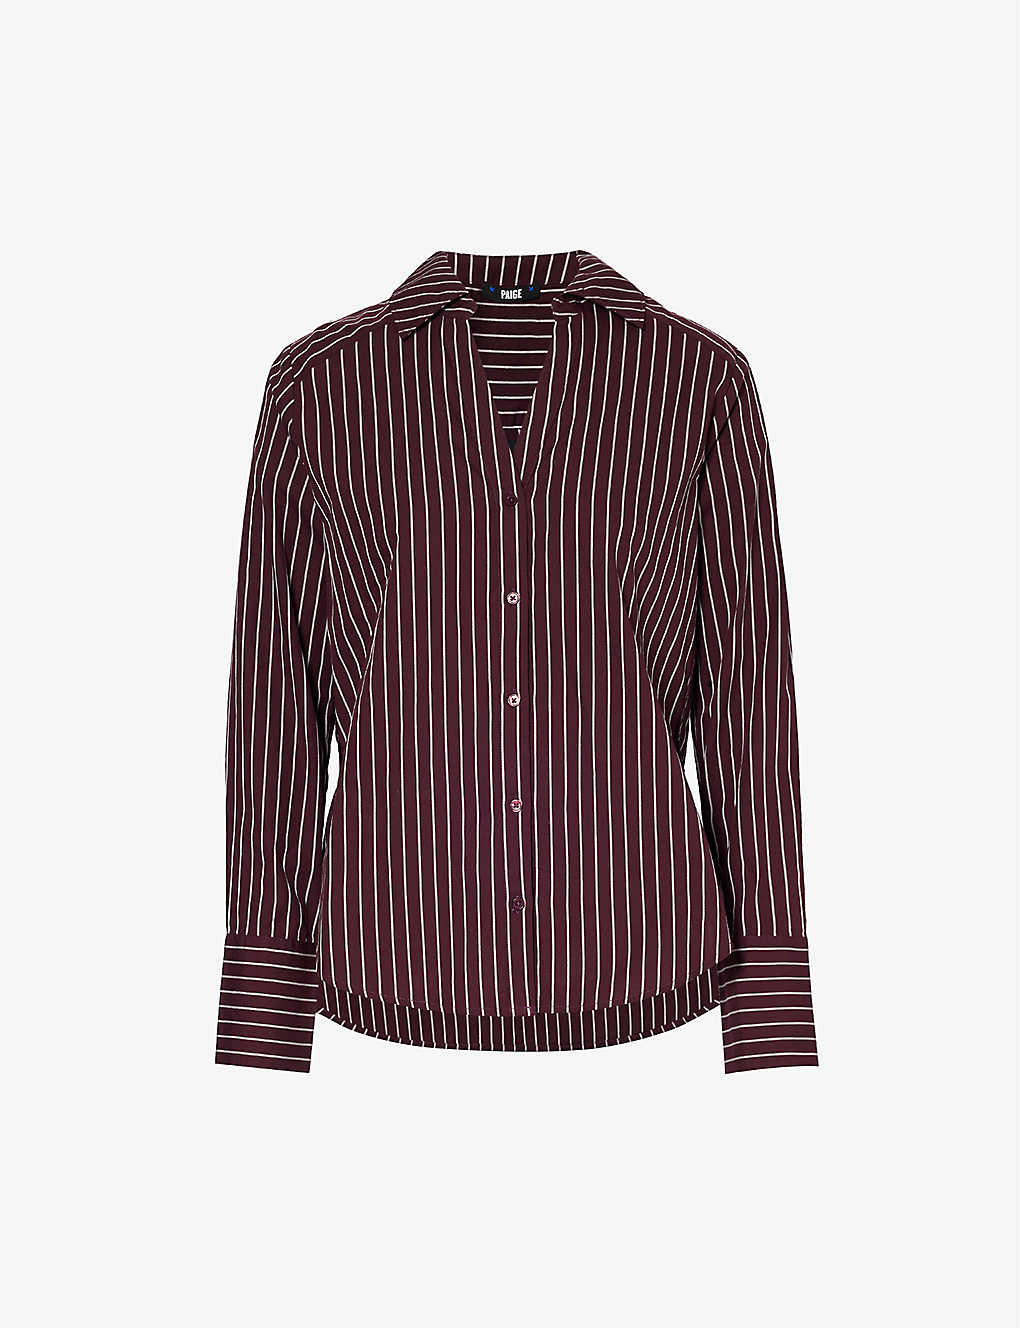 Paige Davlyn Striped Cotton Shirt In Plum/claret